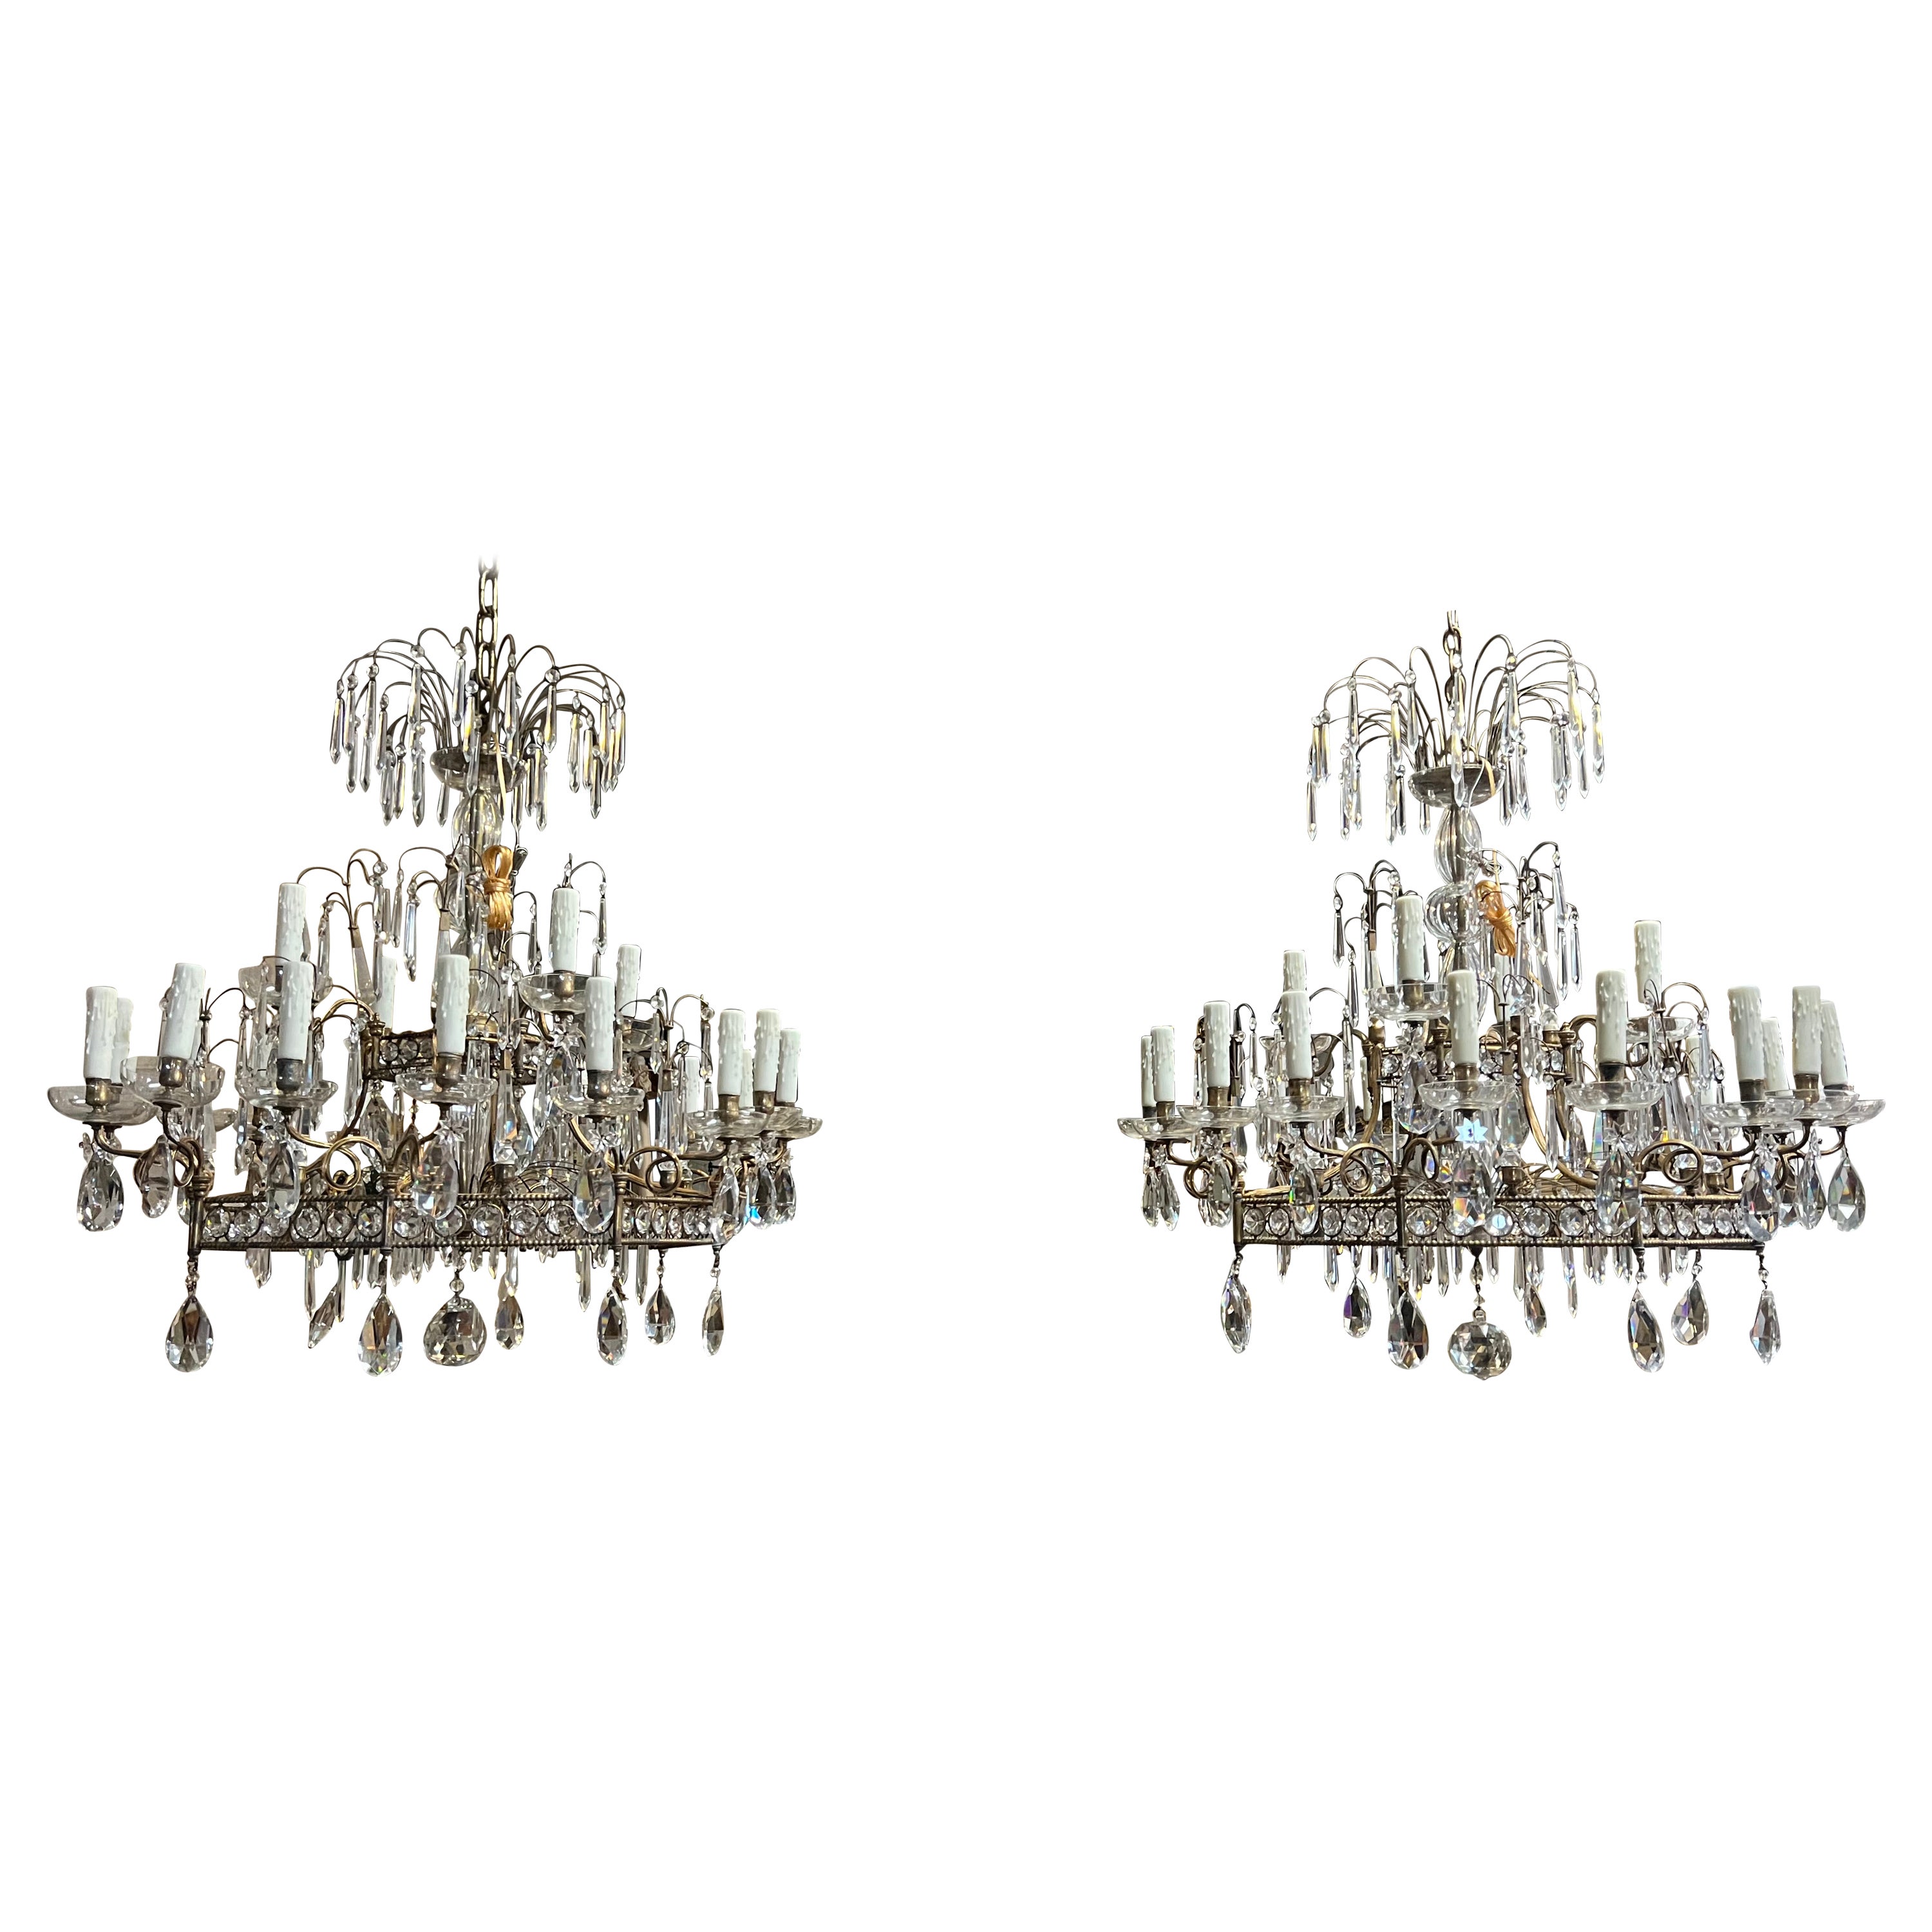 Pair of Italian Bronze and Crystal Chandeliers